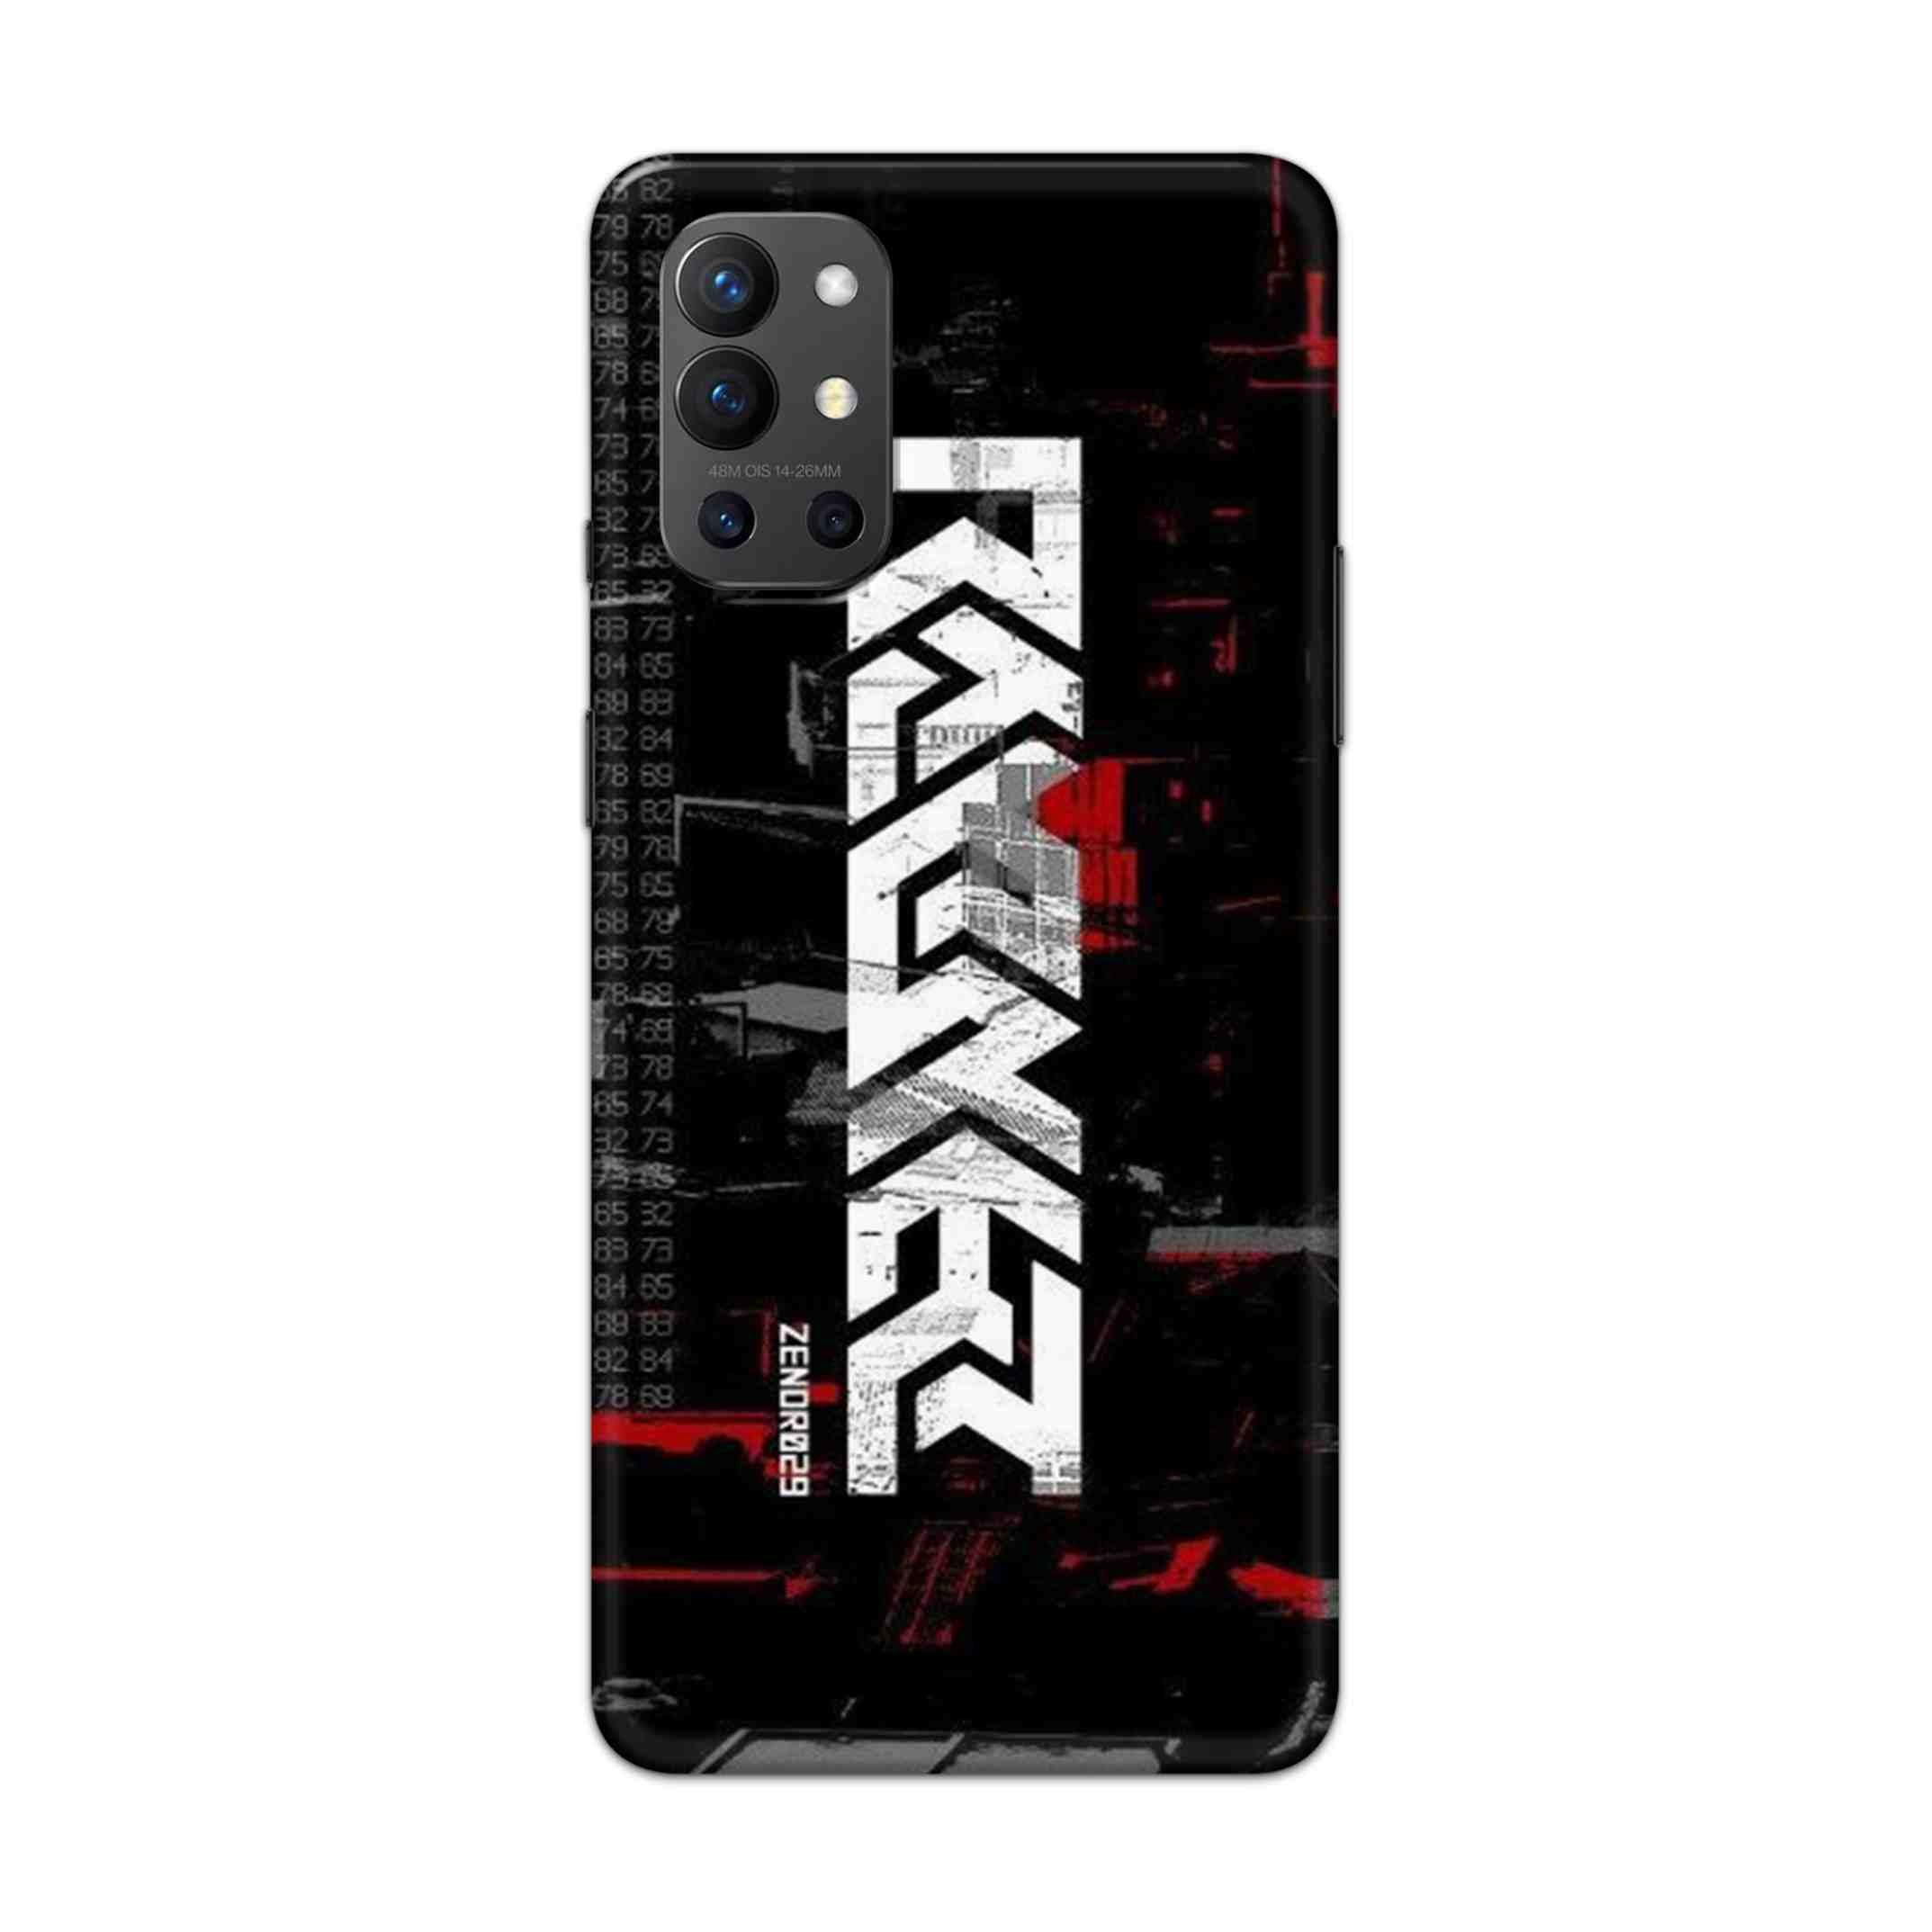 Buy Raxer Hard Back Mobile Phone Case Cover For OnePlus 9R / 8T Online